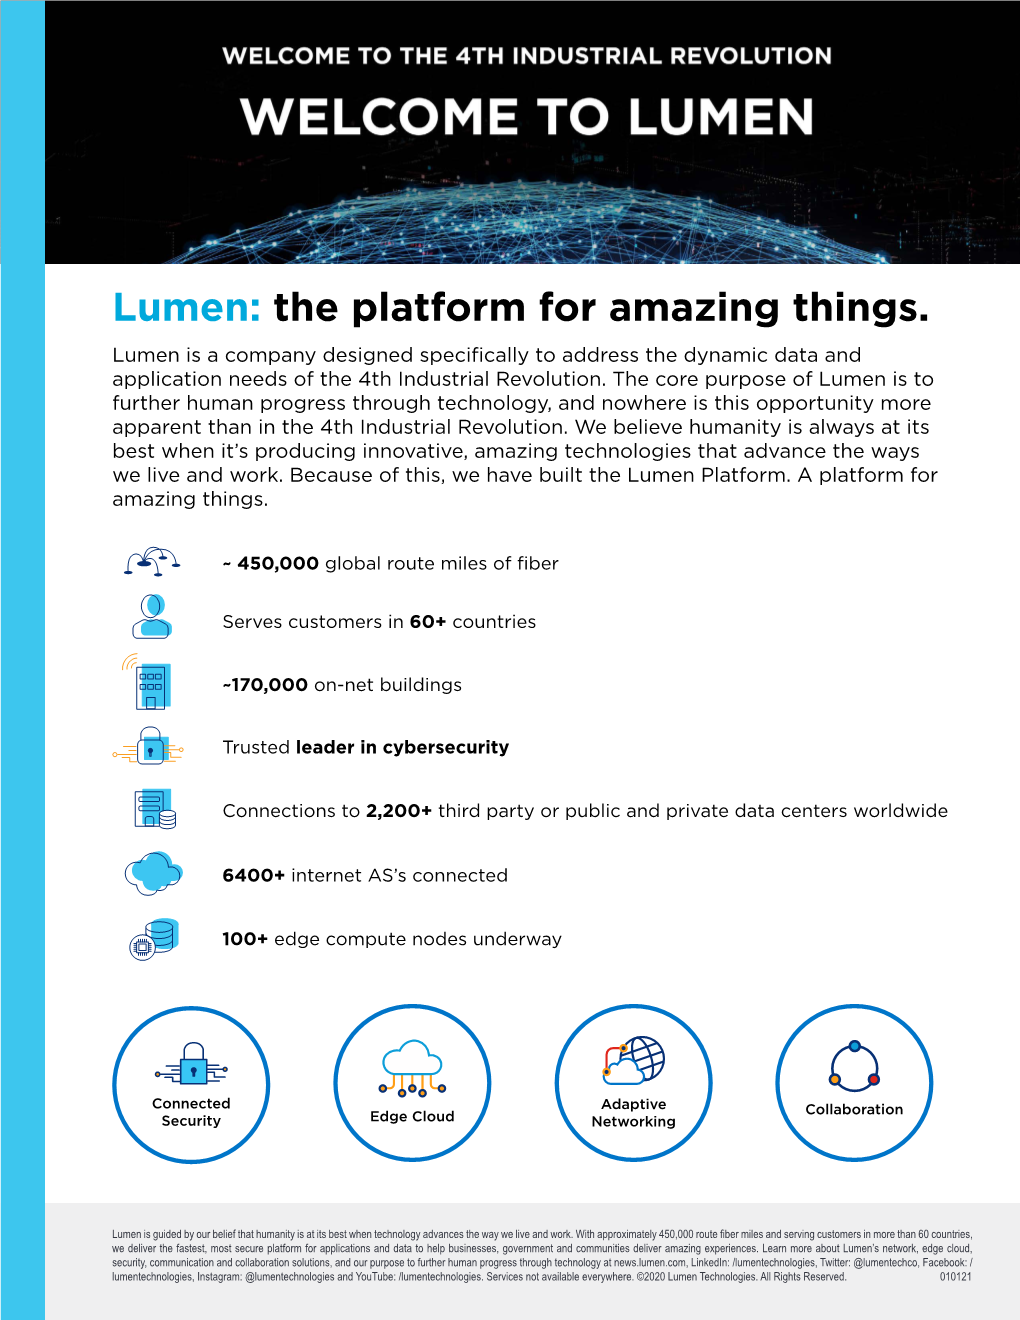 Lumen: the Platform for Amazing Things. Lumen Is a Company Designed Specifically to Address the Dynamic Data and Application Needs of the 4Th Industrial Revolution